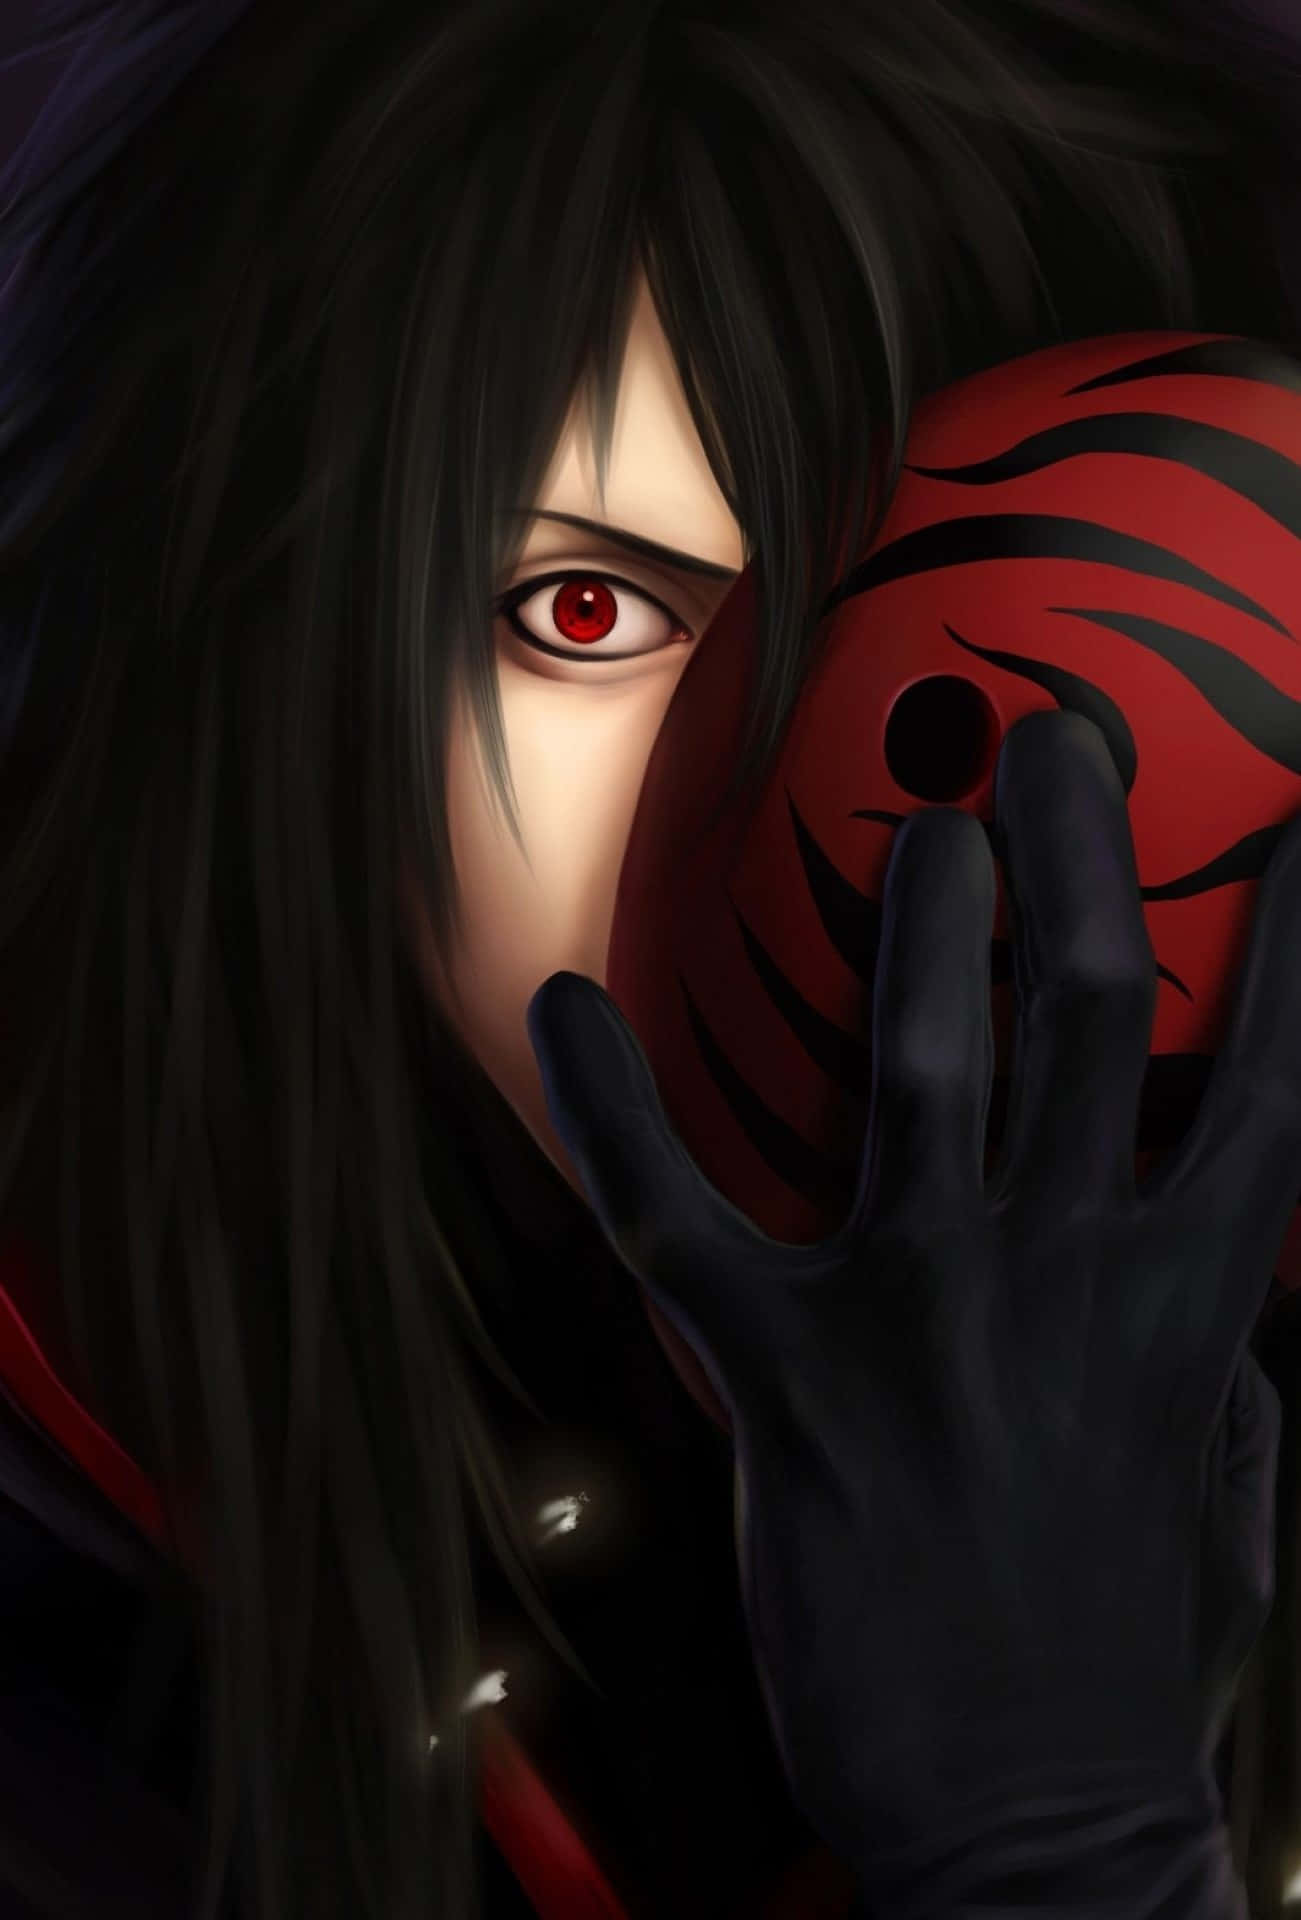 A Black And Red Anime Character Holding A Red Ball Wallpaper